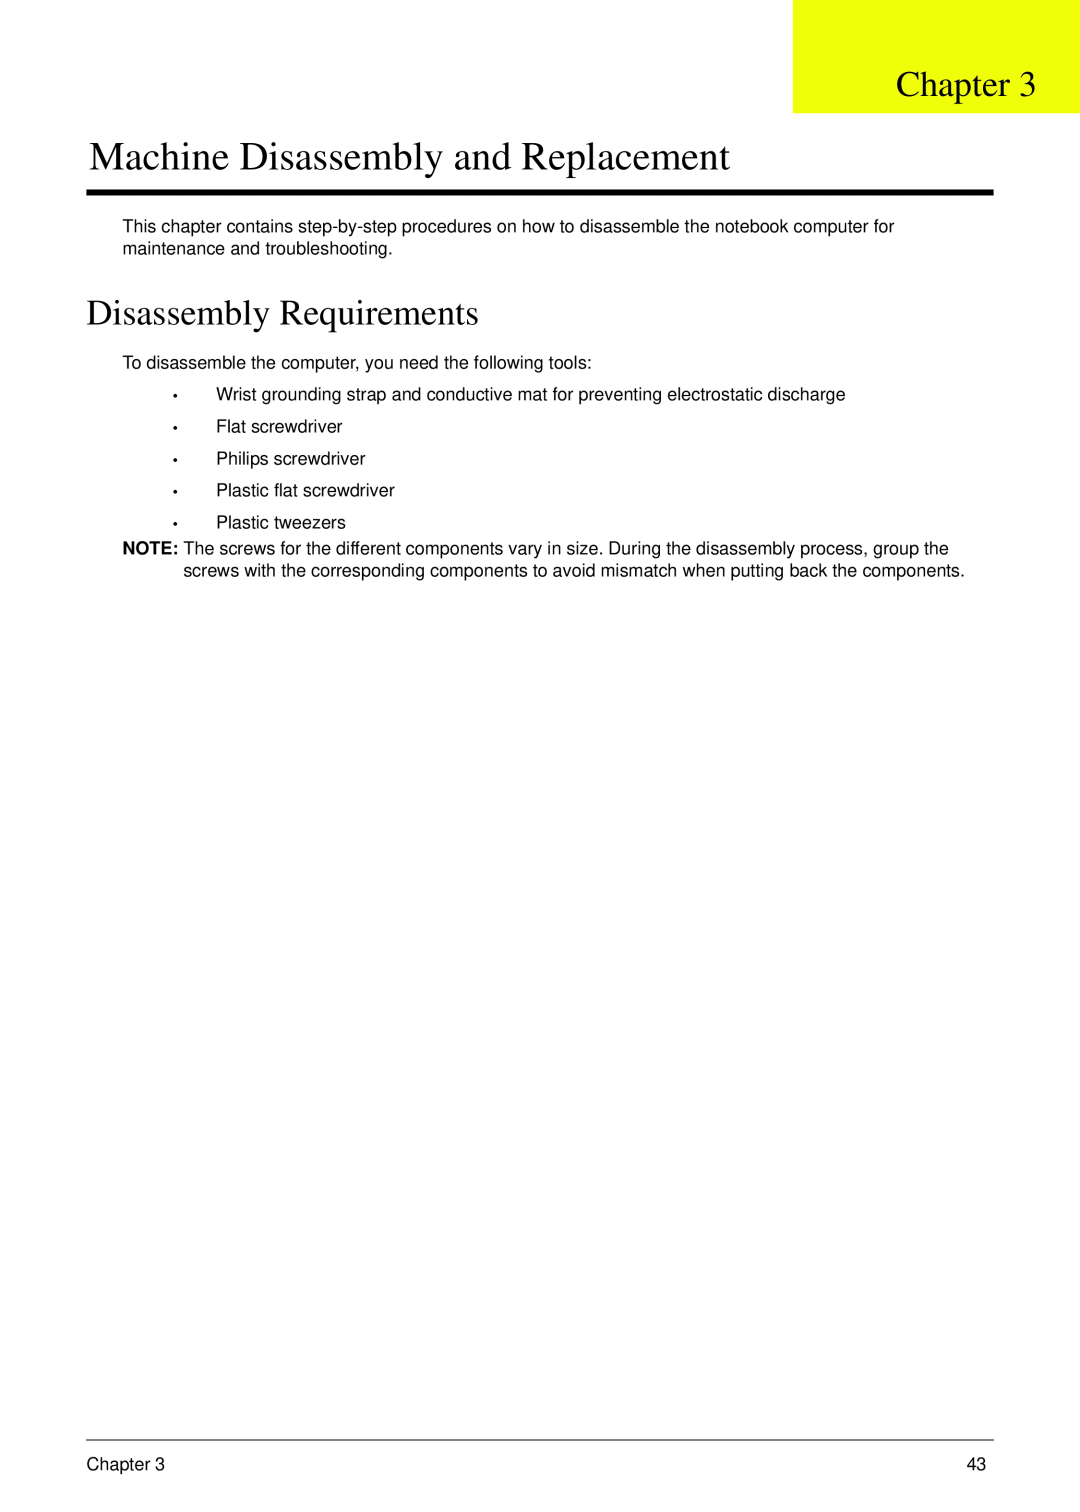 Acer 4730 manual Machine Disassembly and Replacement, Disassembly Requirements, Chapter 